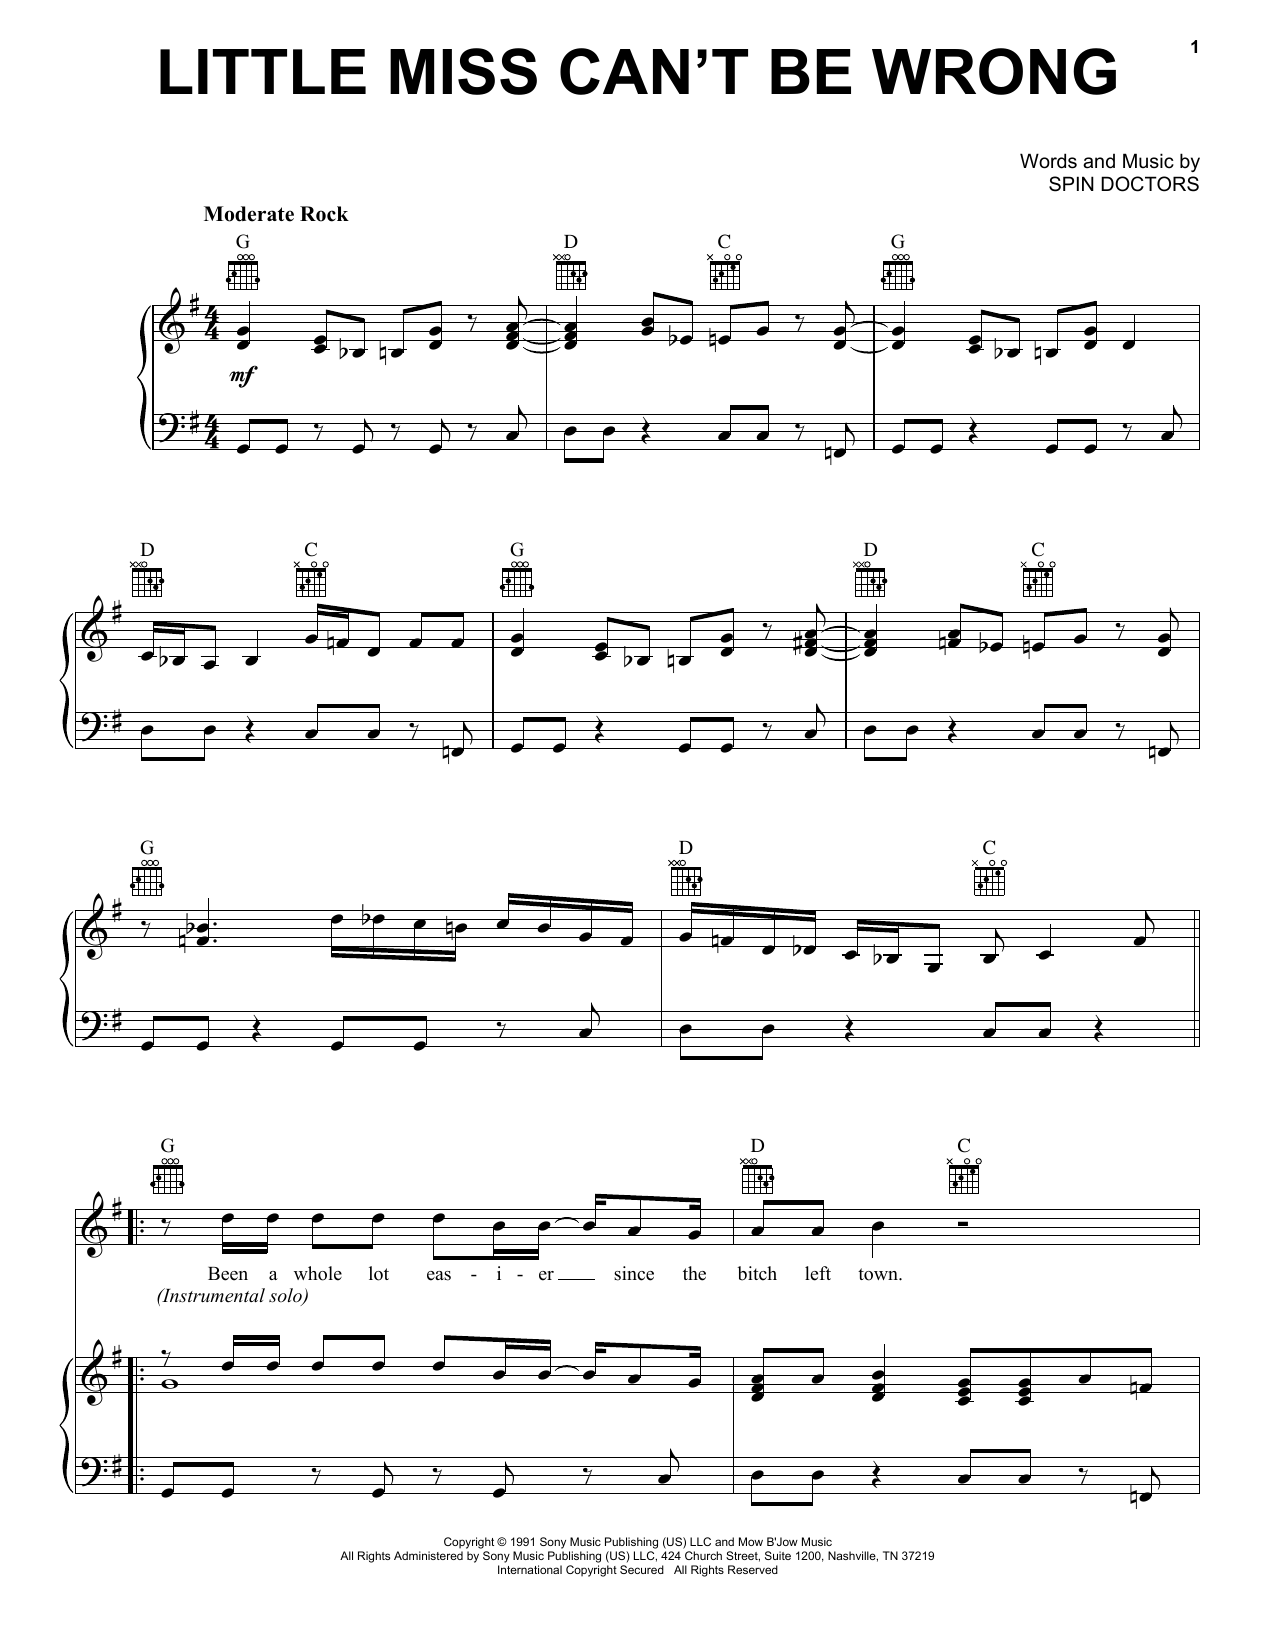 Download Spin Doctors Little Miss Can't Be Wrong Sheet Music